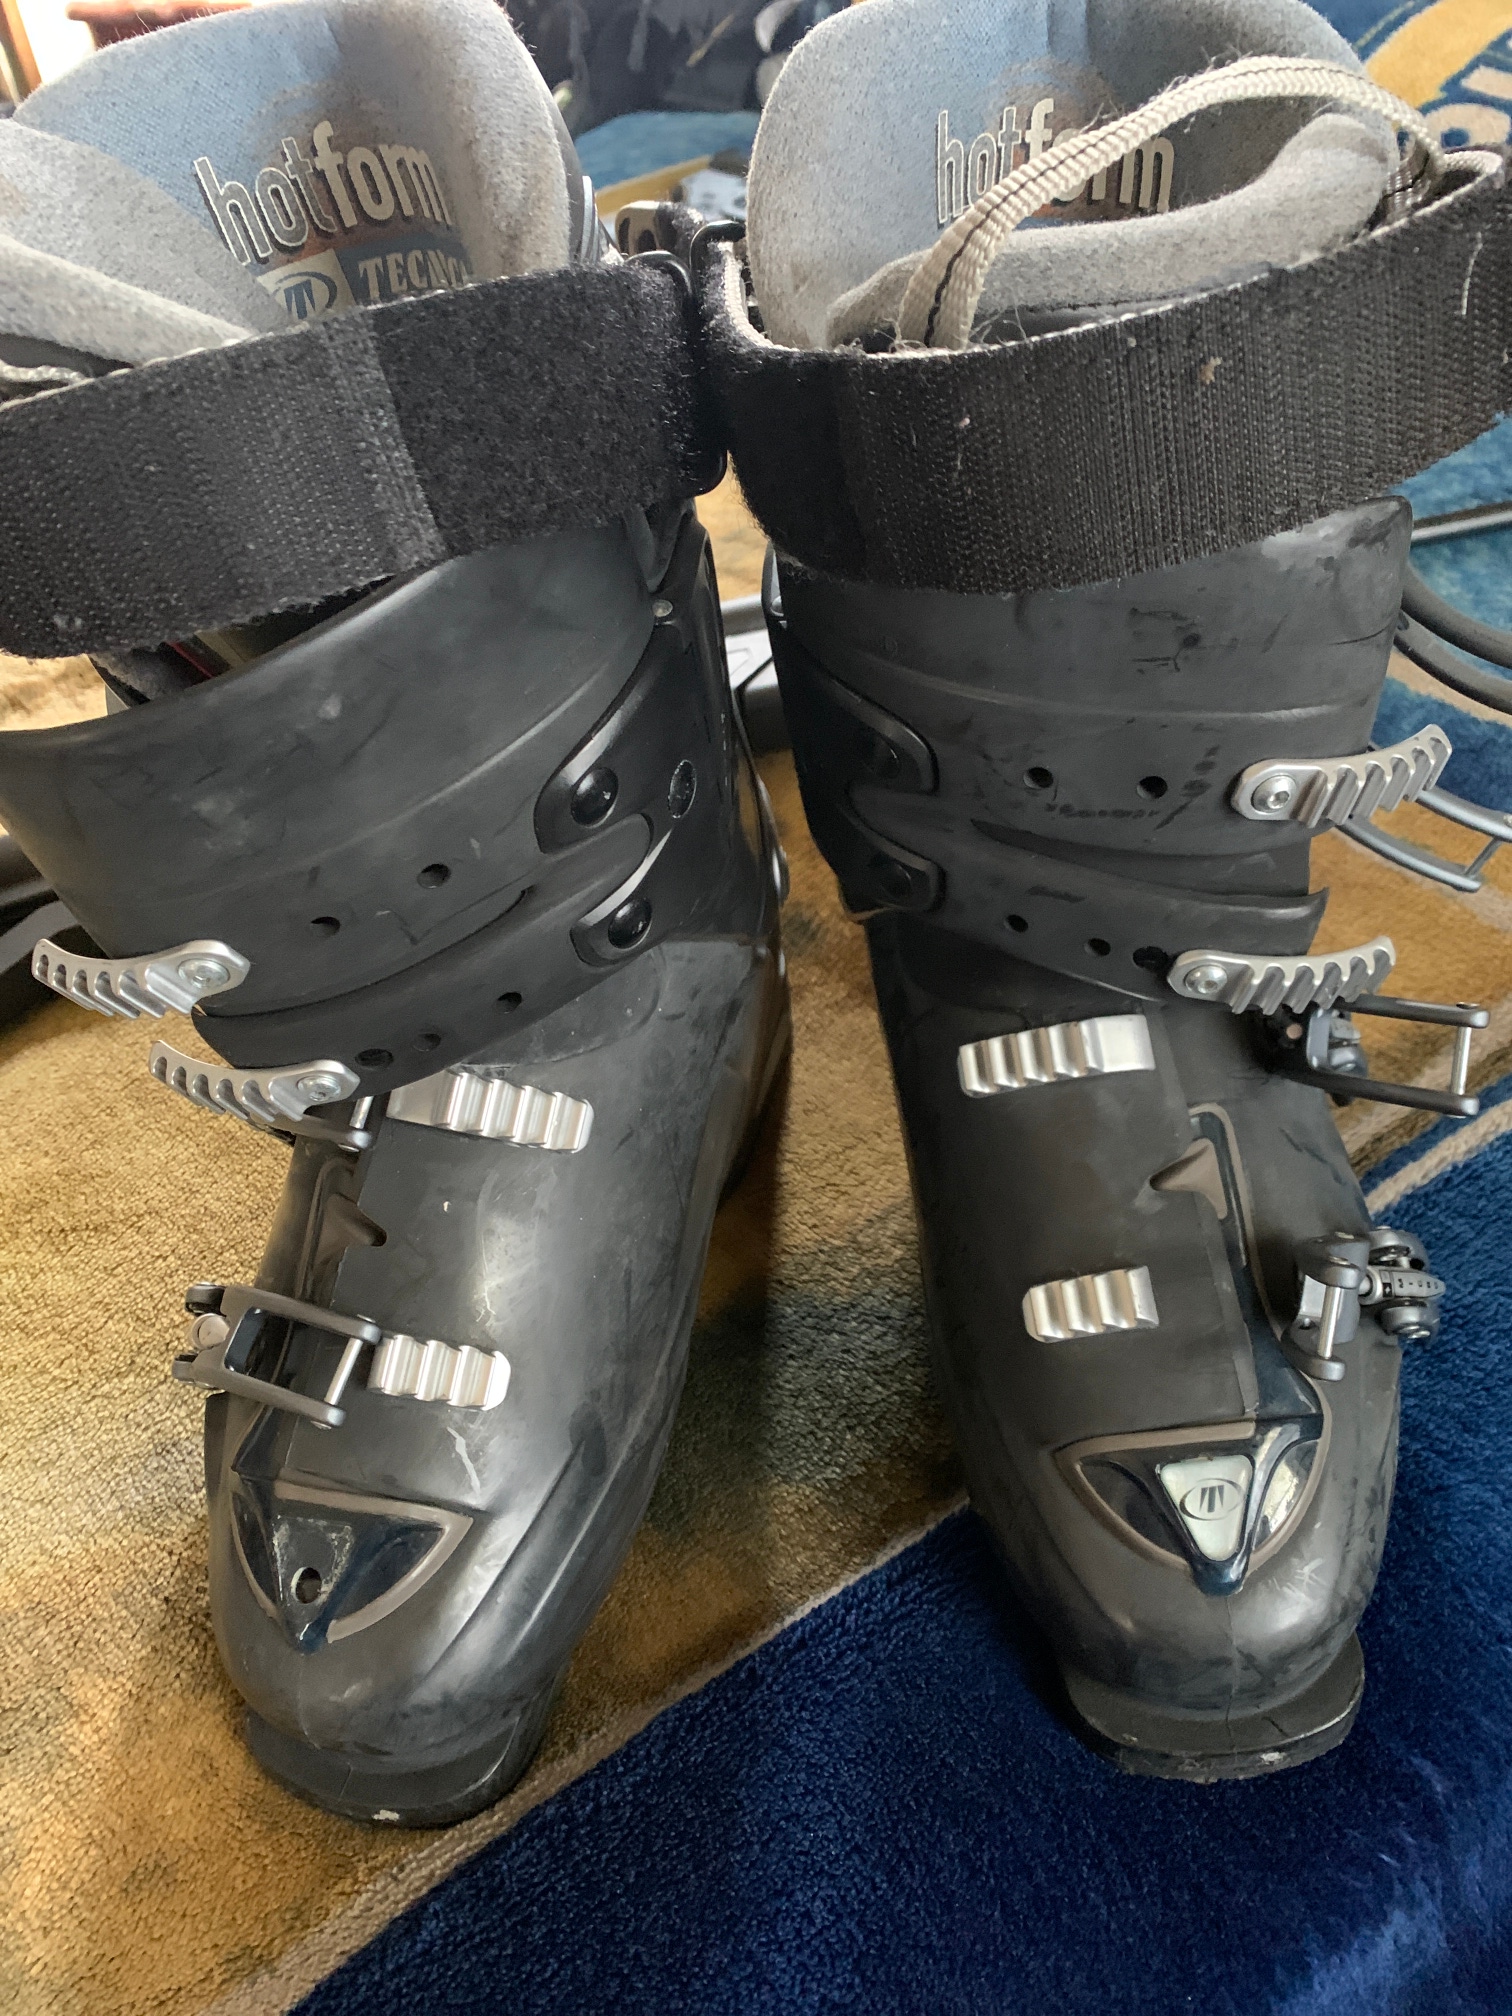 Used Women's Tecnica Rival X9 Skiing Boots